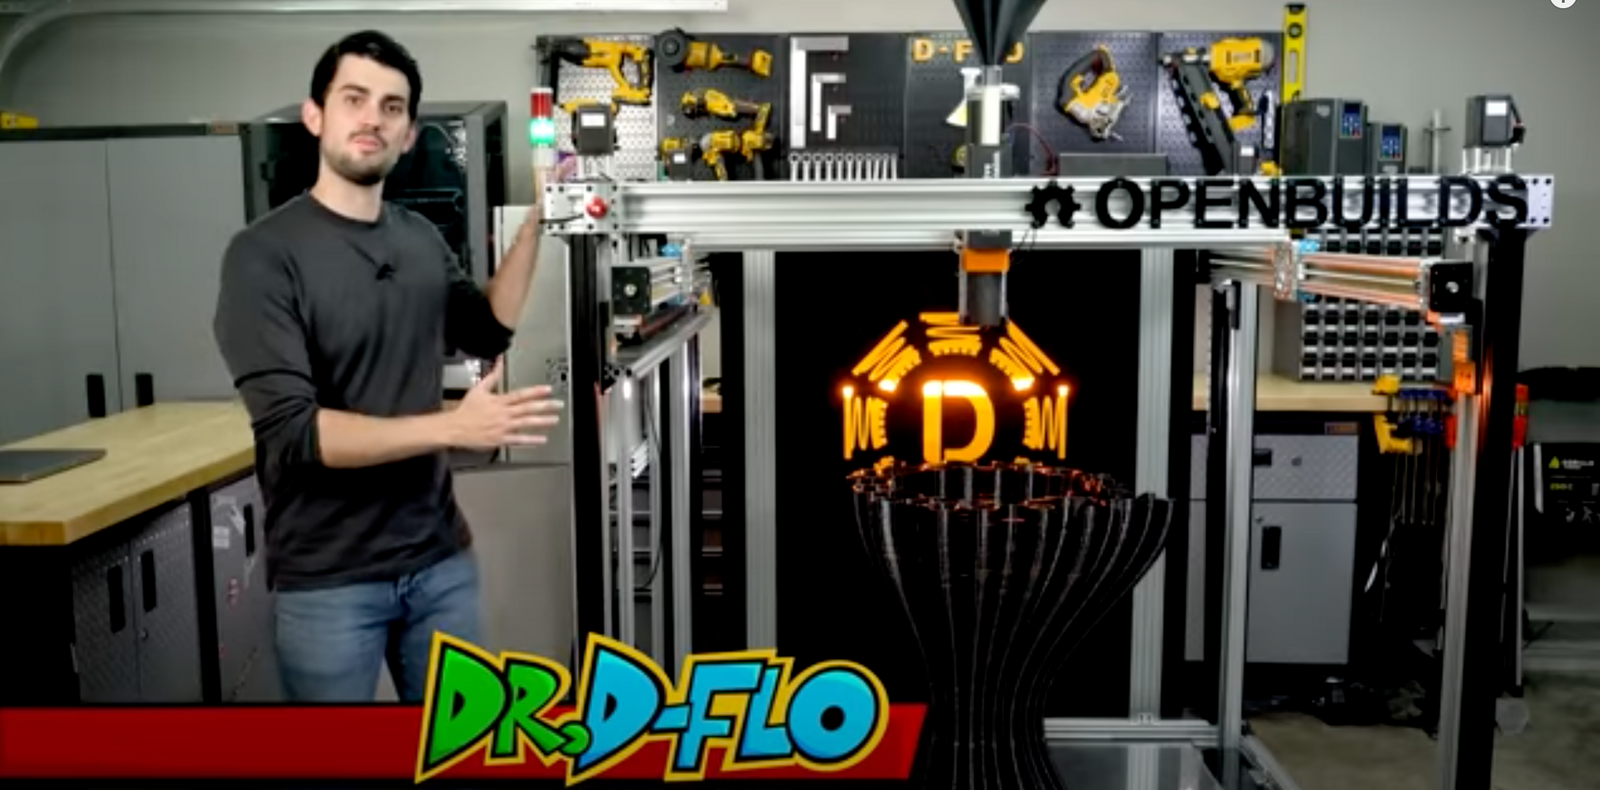 Dr. D-Flo has released the fourth video installment of his multi-part Youtube walkthrough of building a large format 3D printer!